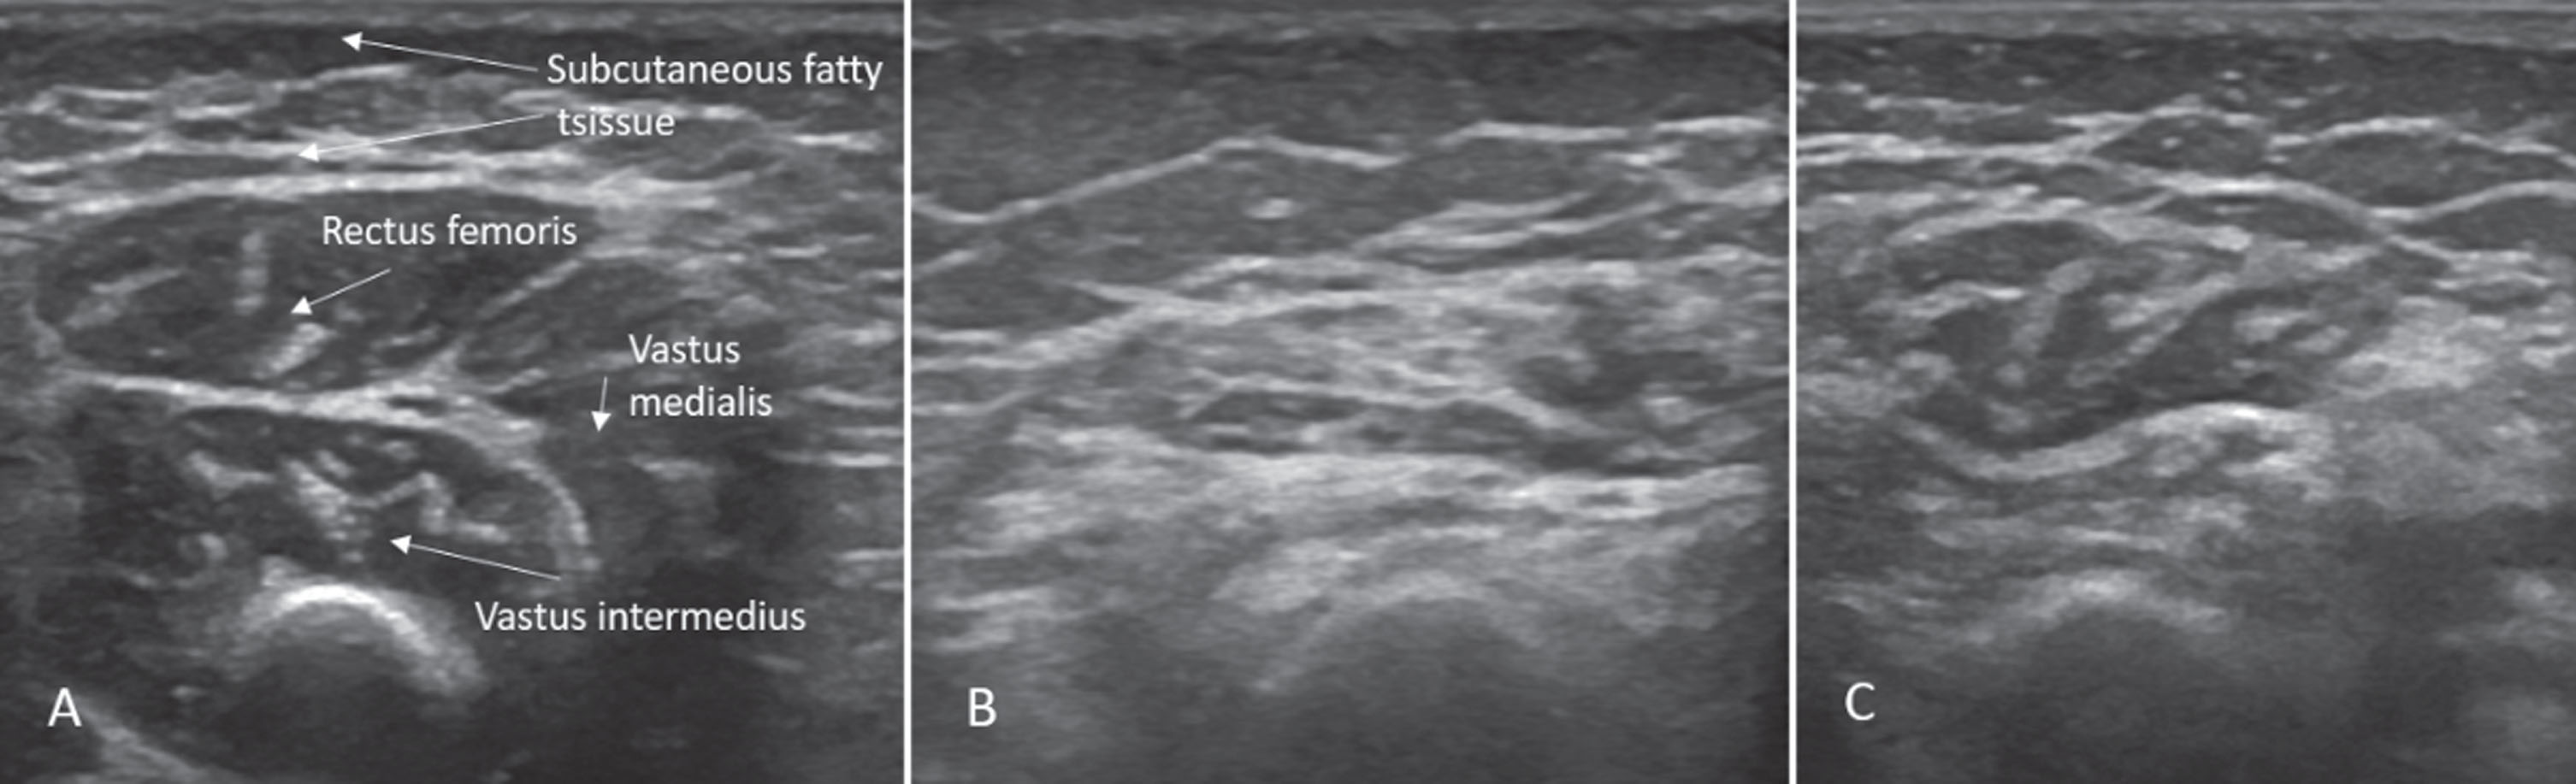 Sonographic findings of quadriceps in case 1: (A) Age 2 months: normal echogenicity and clearly visible internal septa. (B) Age 14 months, 6 months after onset of disease: a pathologic increase in background echogenicity in comparison to subcutaneous fat tissue and less definable intramuscular septa. (C) Age 17 months, after 8 months of nusinersen therapy: partial recovery with increase in volume and normalisation of echogenicity in the rectus femoris.